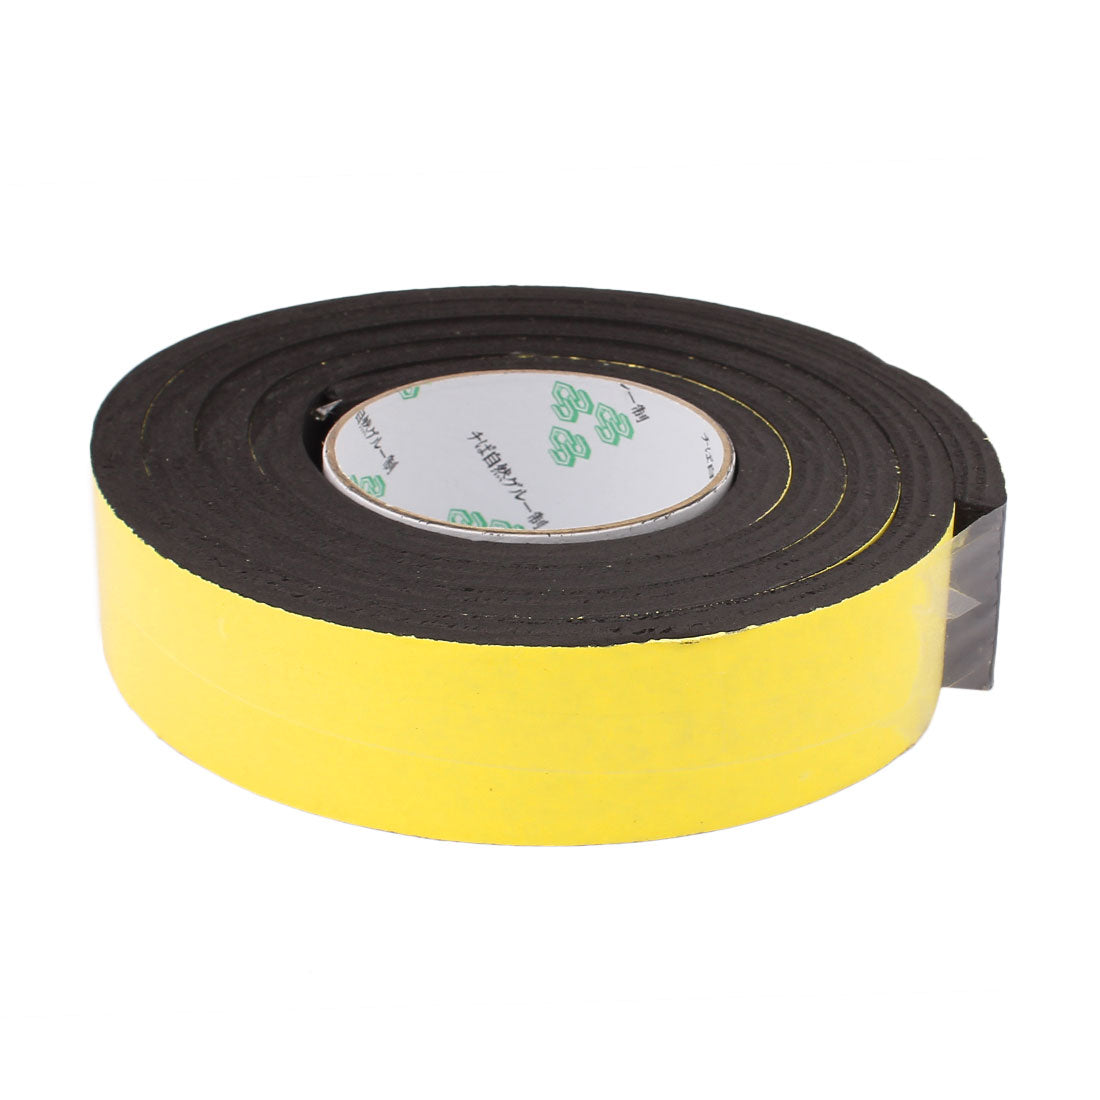 uxcell Uxcell 40mm x 10mm Single Sided Self Adhesive Shockproof Sponge Foam Tape 2M Length